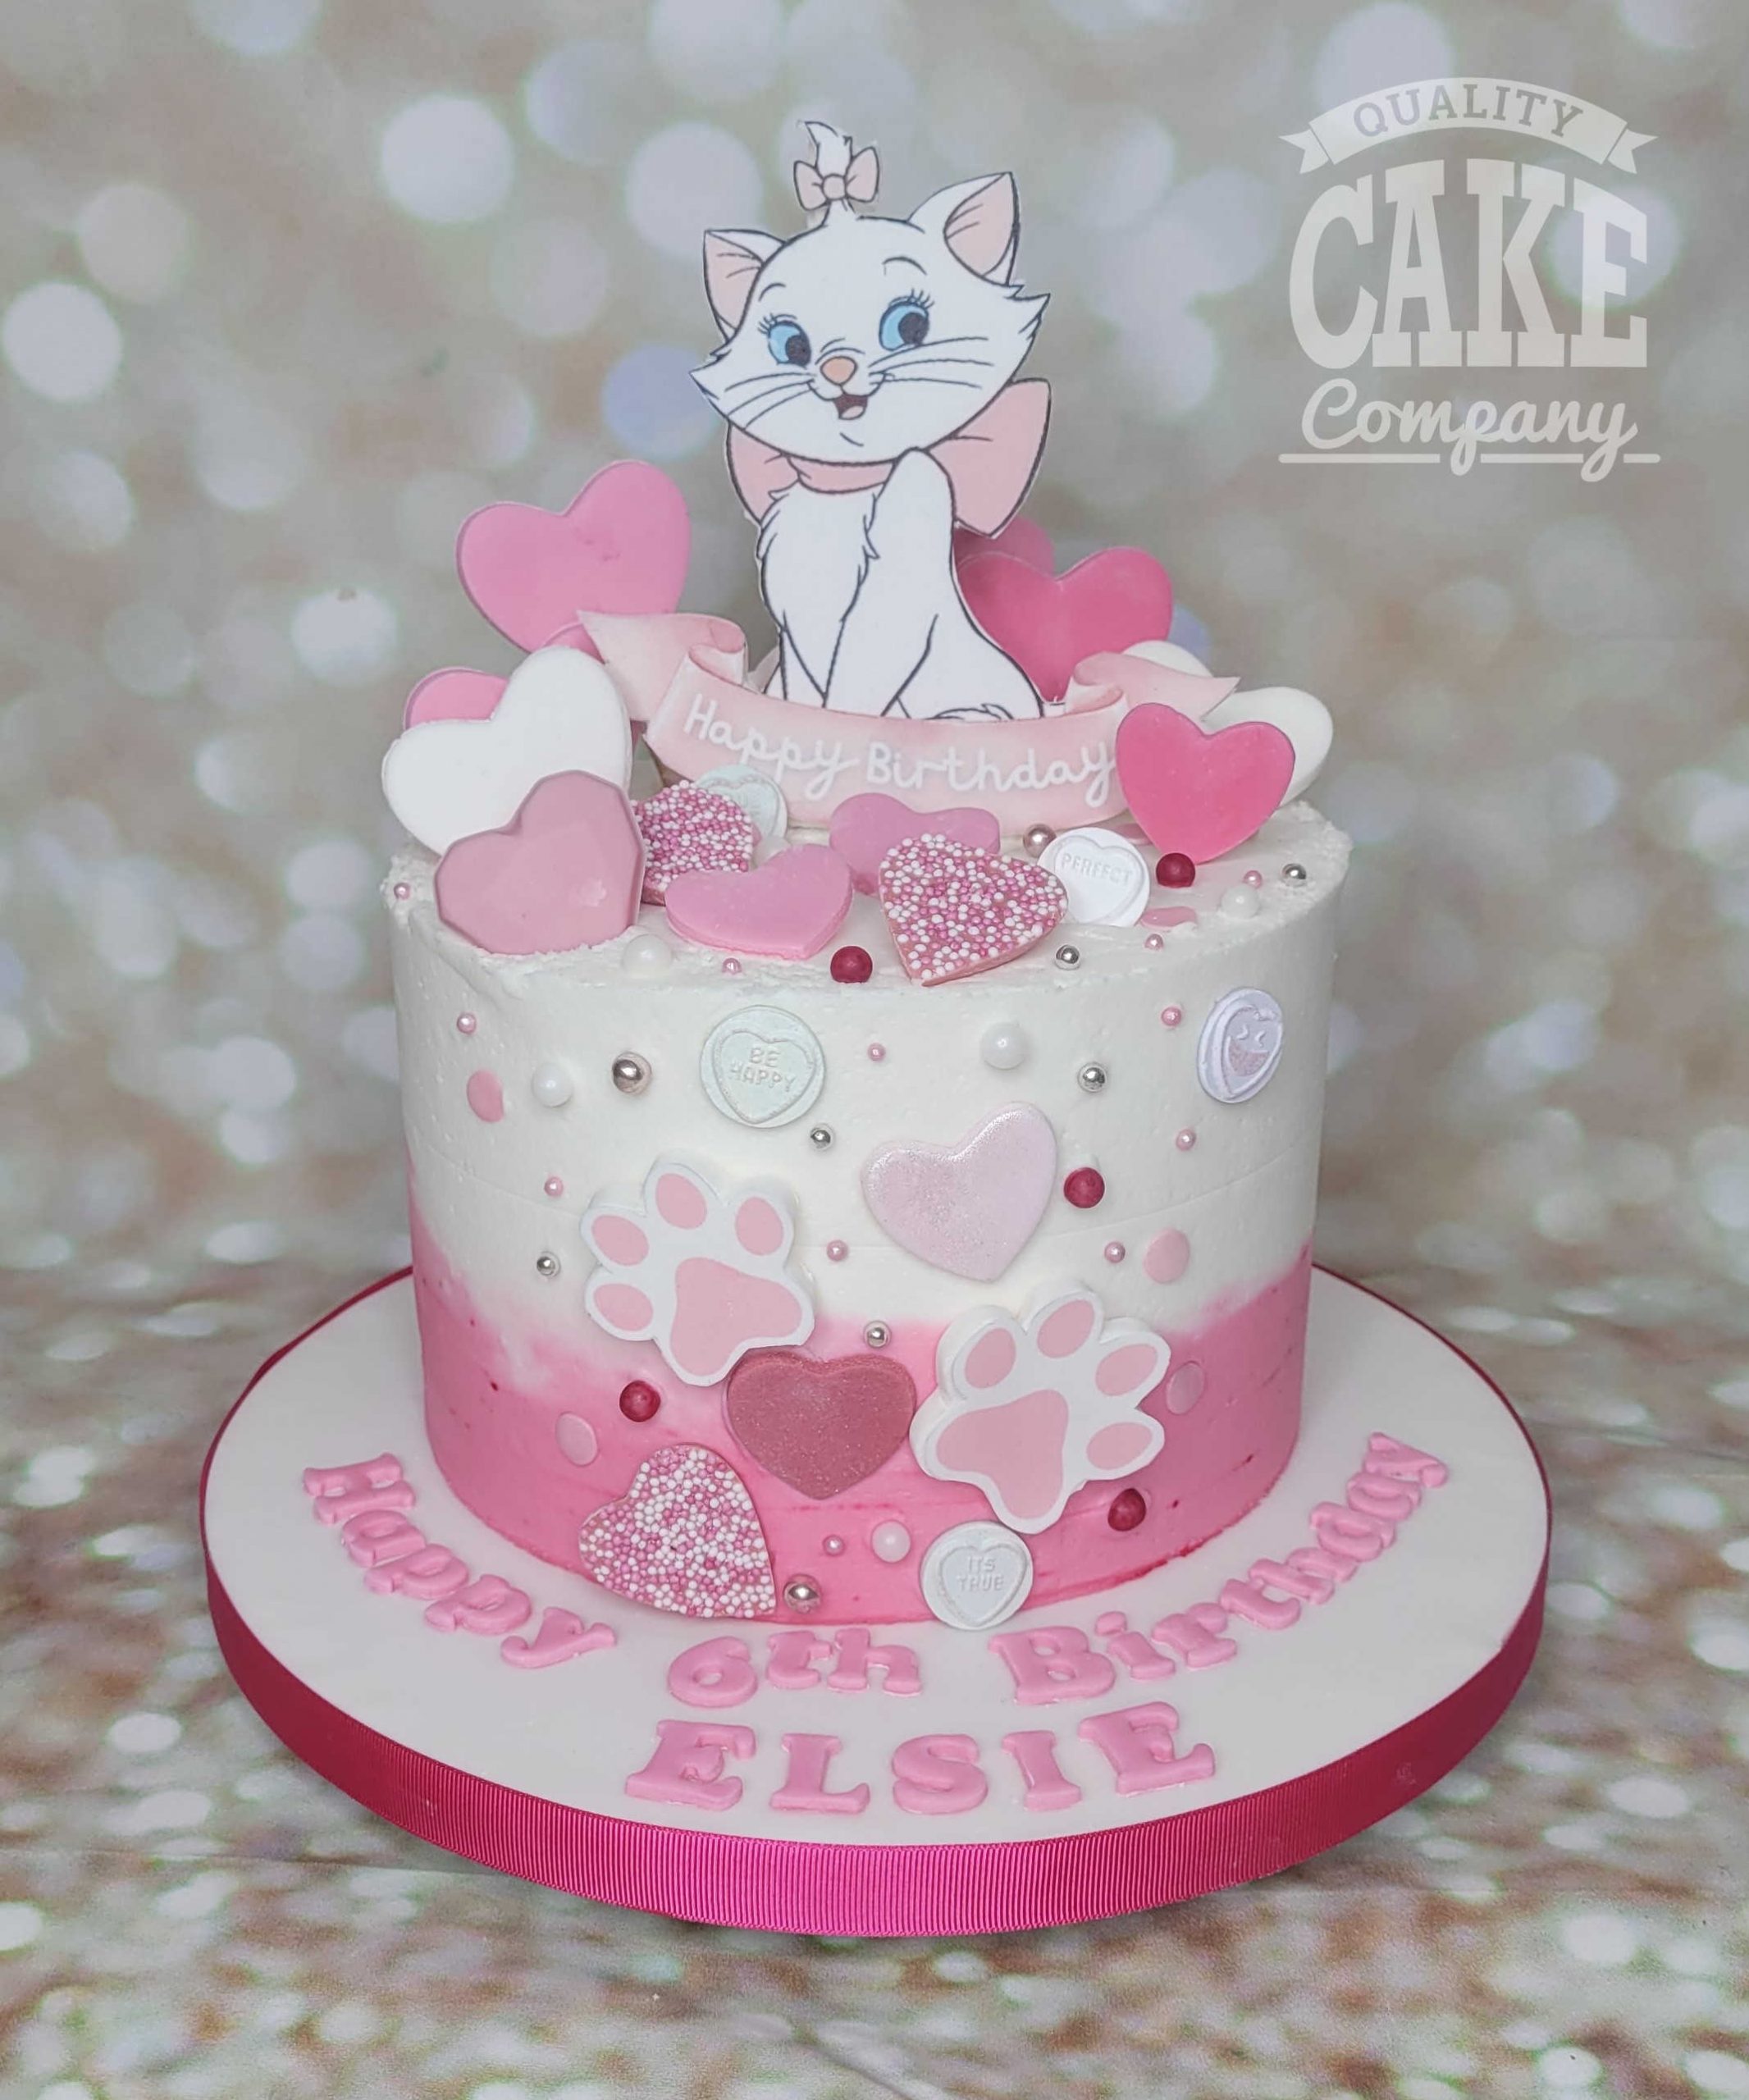 Rose Petal home made cakes - Cat themed birthday cake | Facebook